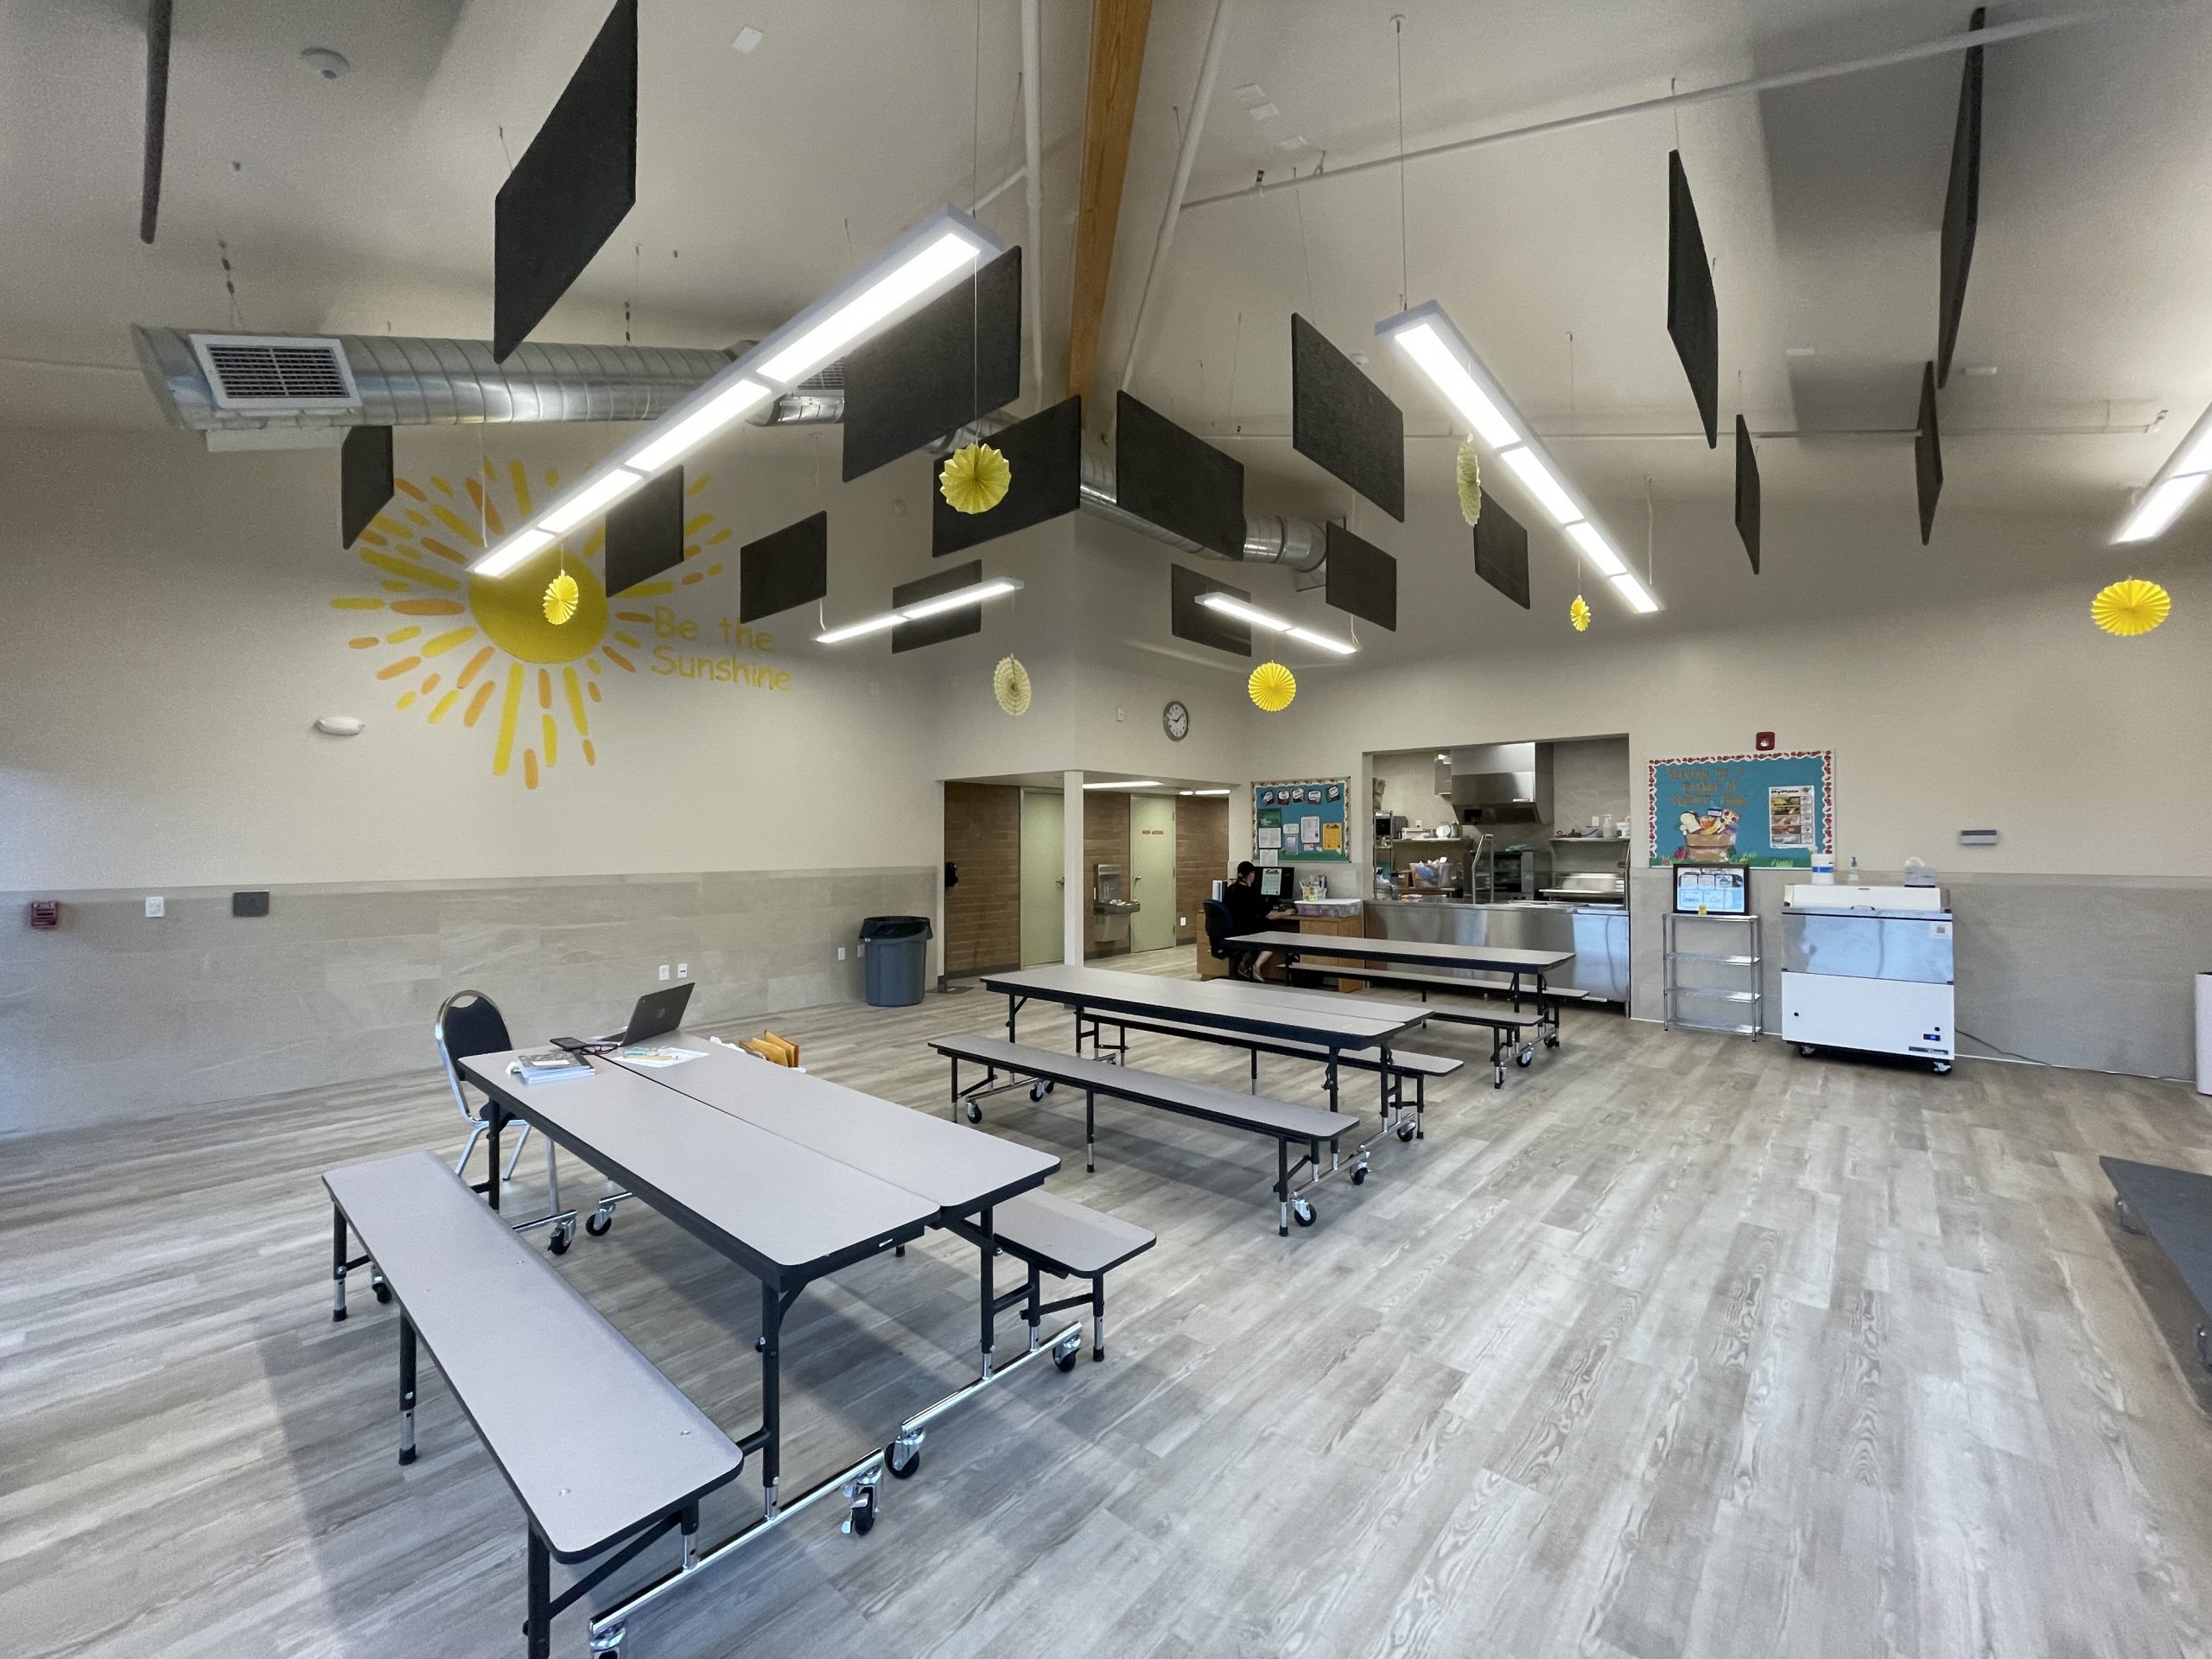 Wide angle view of the newly remodeled lunchroom.